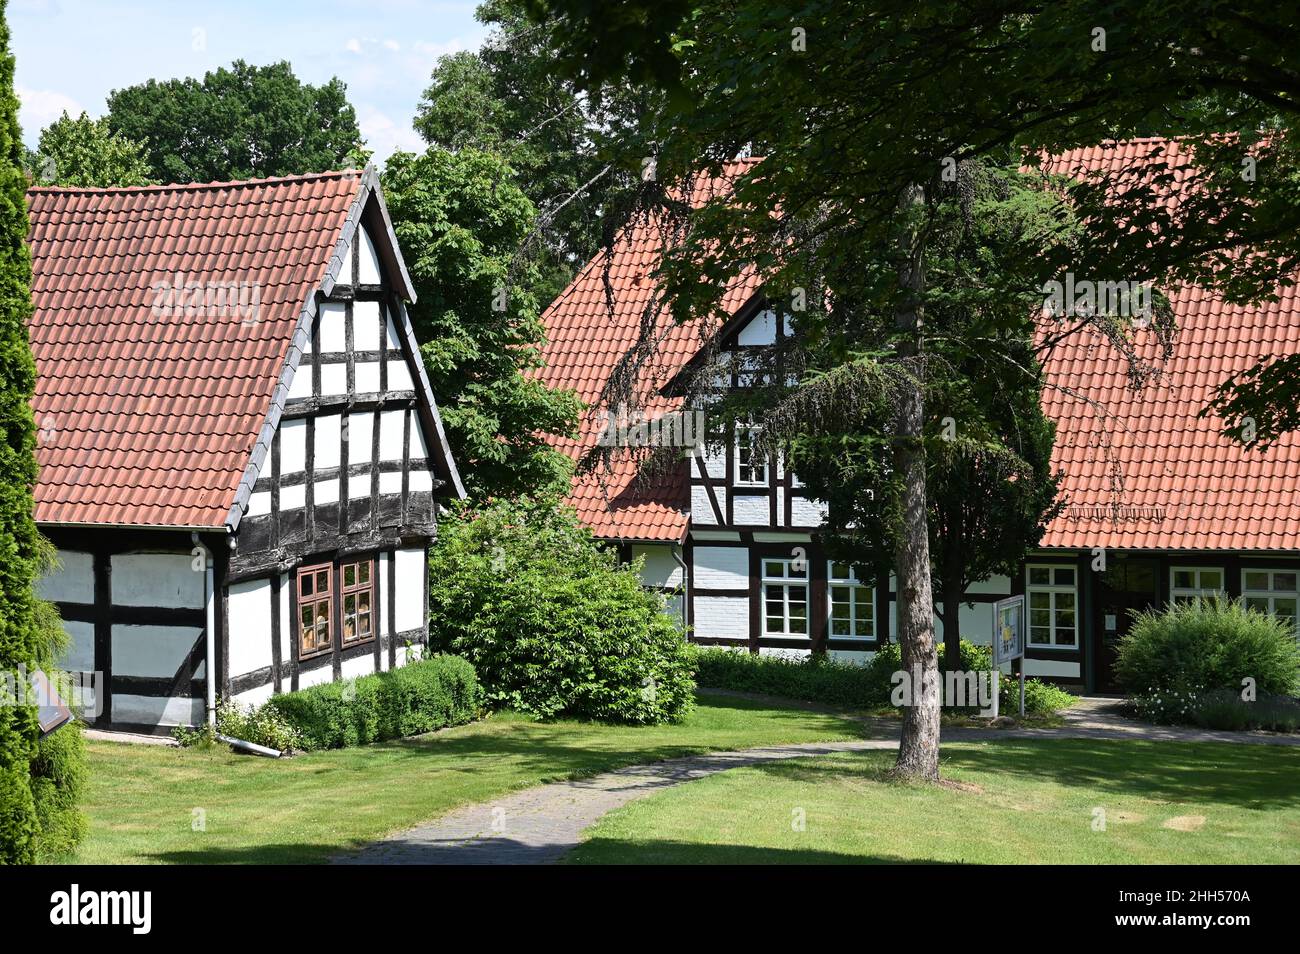 Old half-timbered houses in Marklohe Stock Photo